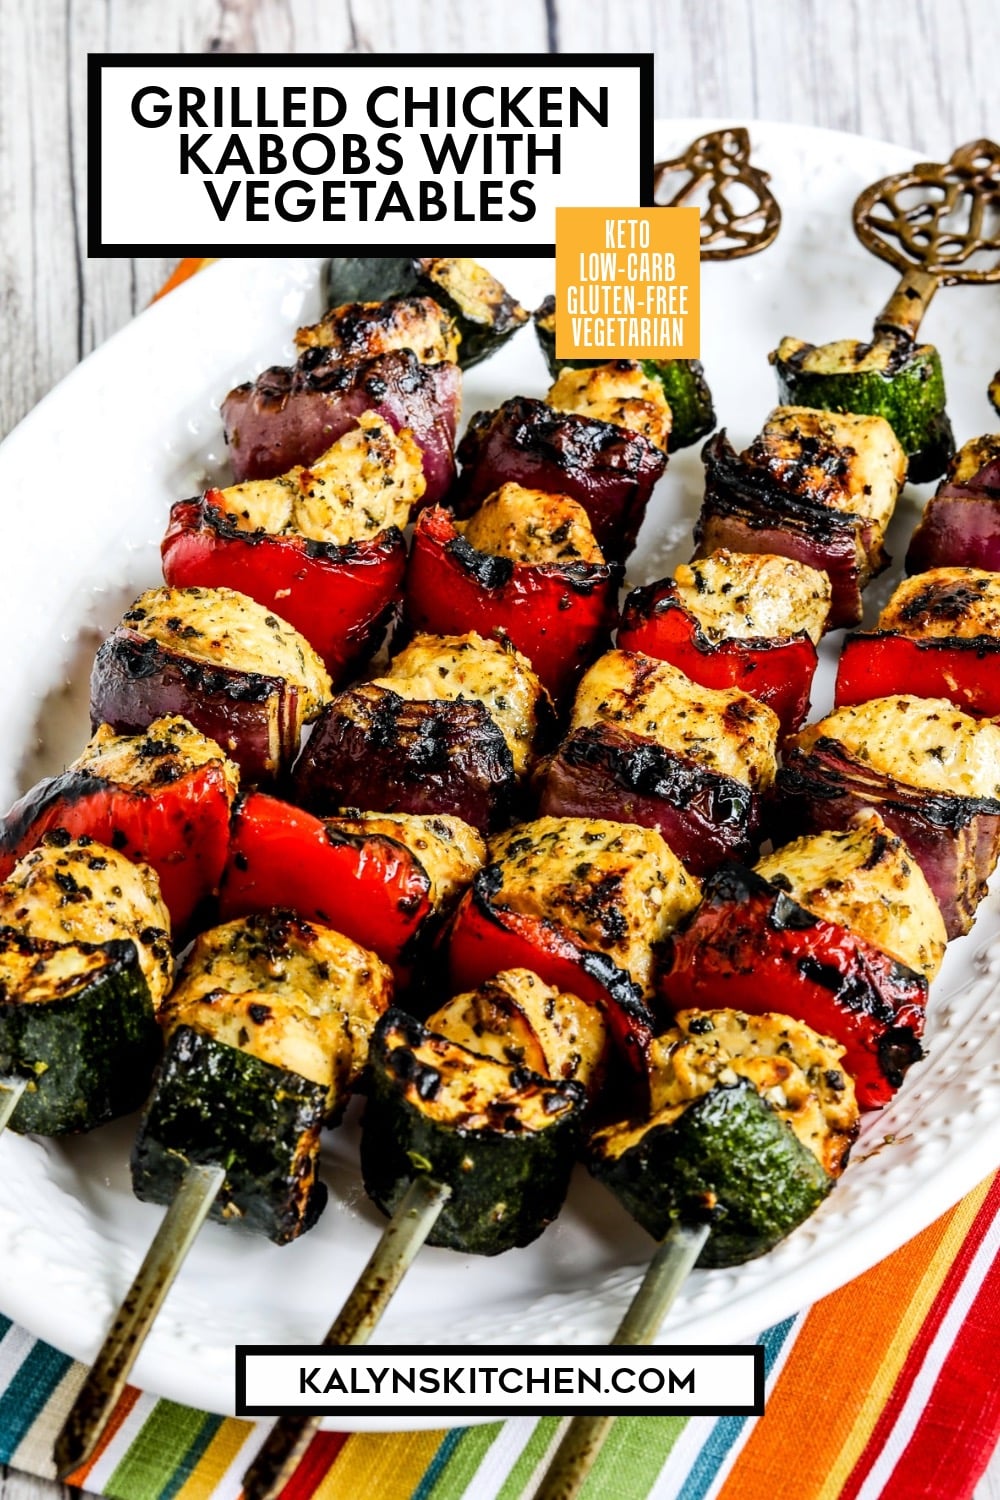 Pinterest image of Grilled Chicken Kabobs with Vegetables